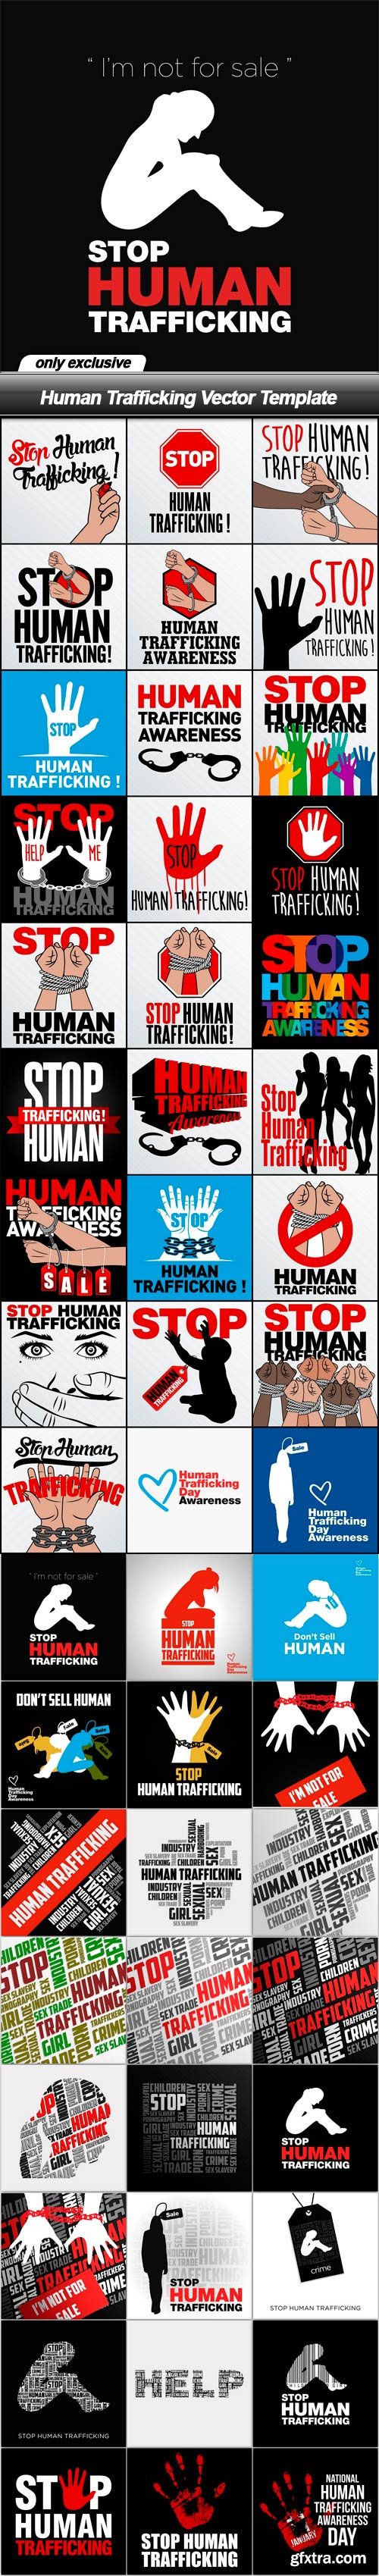 Human Trafficking Vector Template - 51 EPS